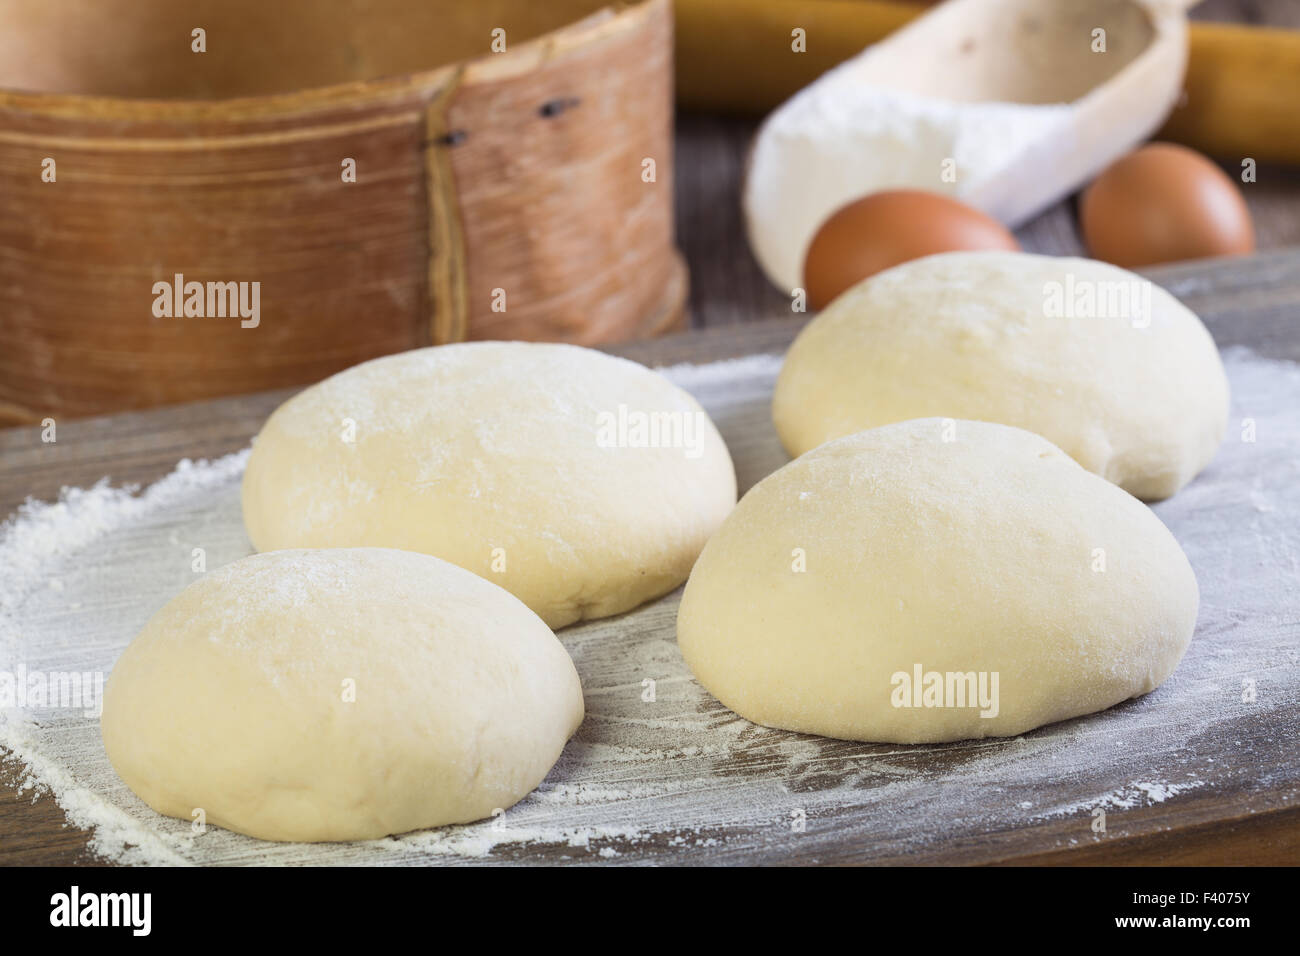 Yeast dough for pies. Stock Photo